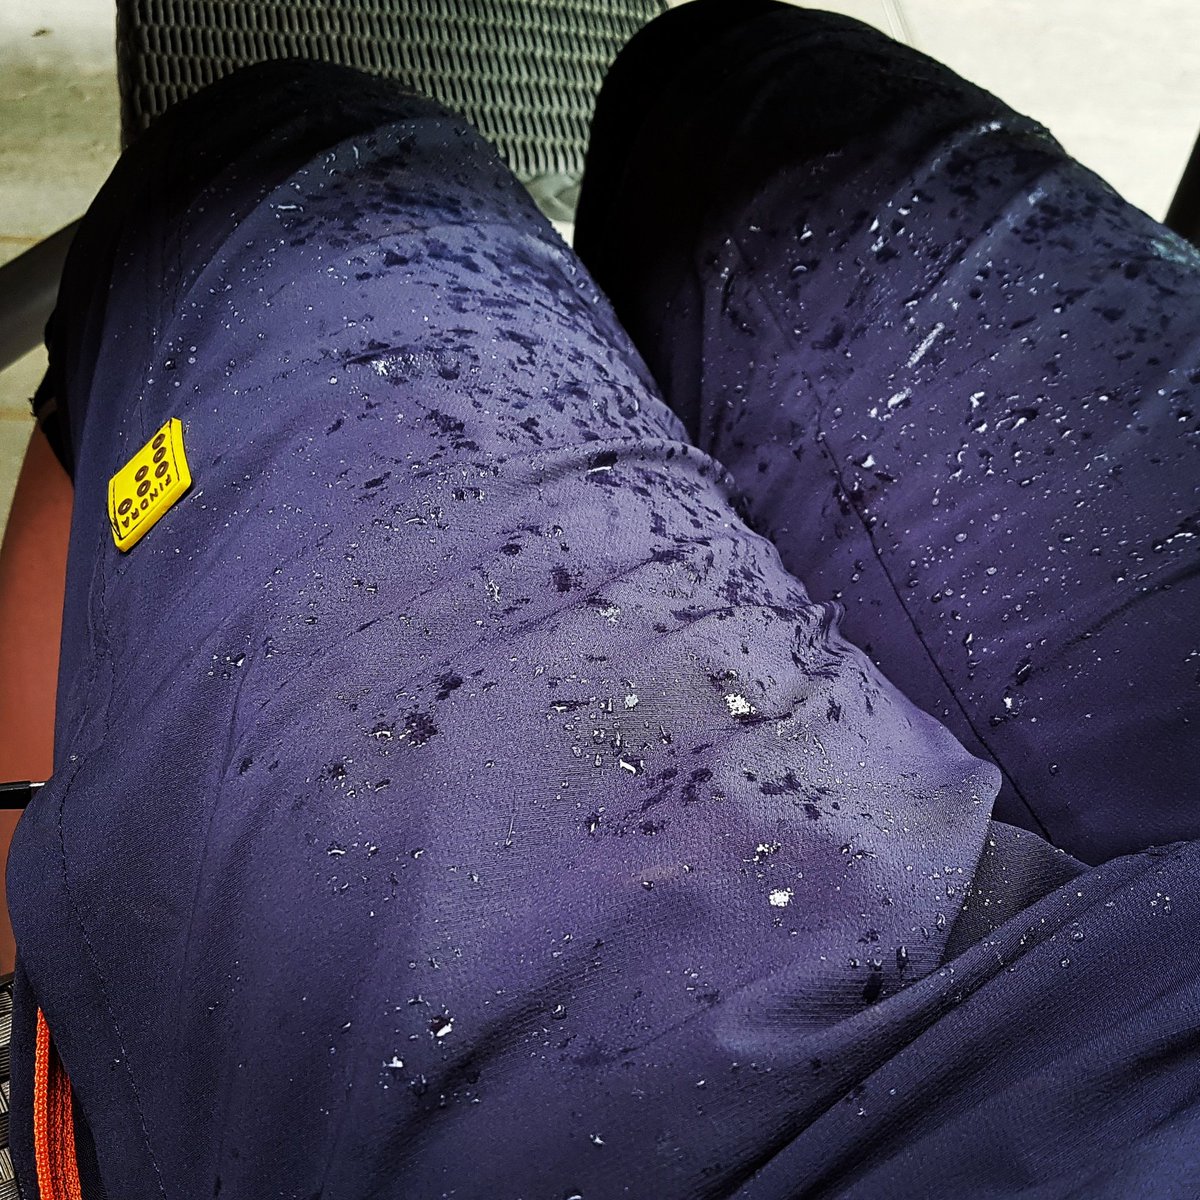 This morning's ride tested the water repellent feature on our Relaxed fit shorts with a mix of sunshine and downpours #styleandfunction